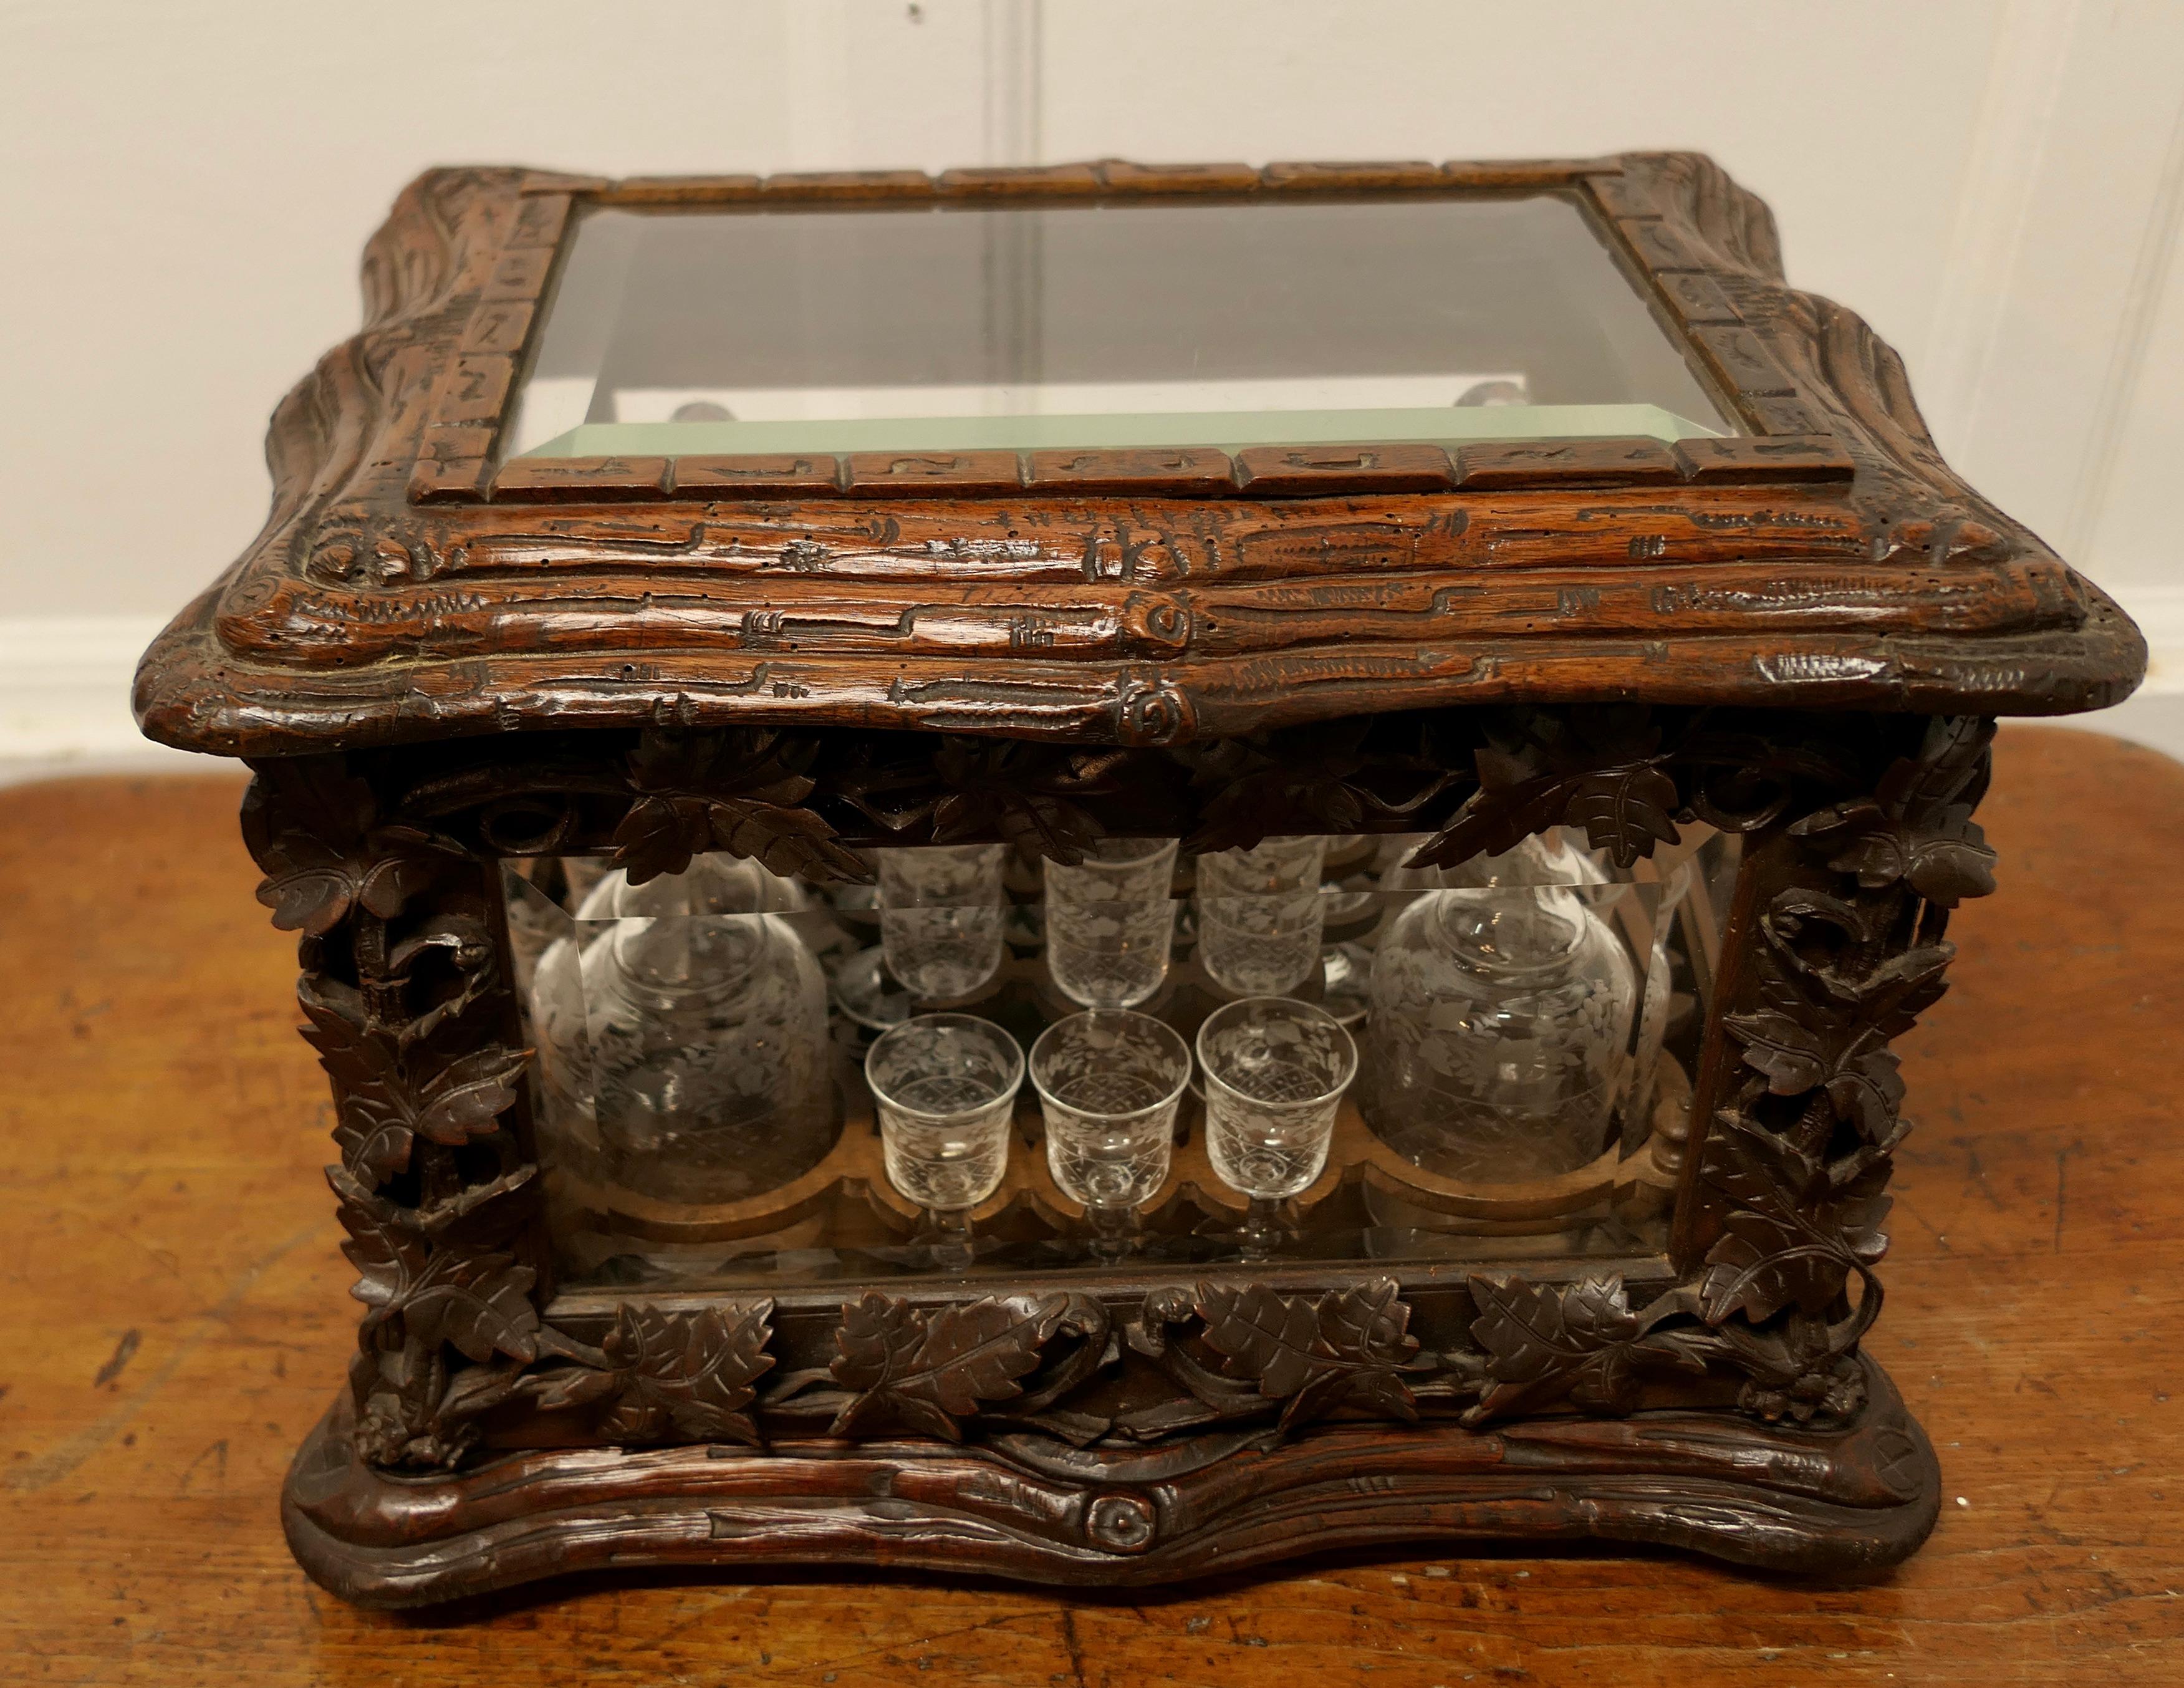 Black Forest “Cave de Liqueur” 

This is a wonderful piece of Craftsmanship it is a Carved Tantalus or Cave de Liqueur with 4 Decanters and 16 Shot Glasses

The cabinet has bevelled Glass panels to the front back and sides with charming Carved